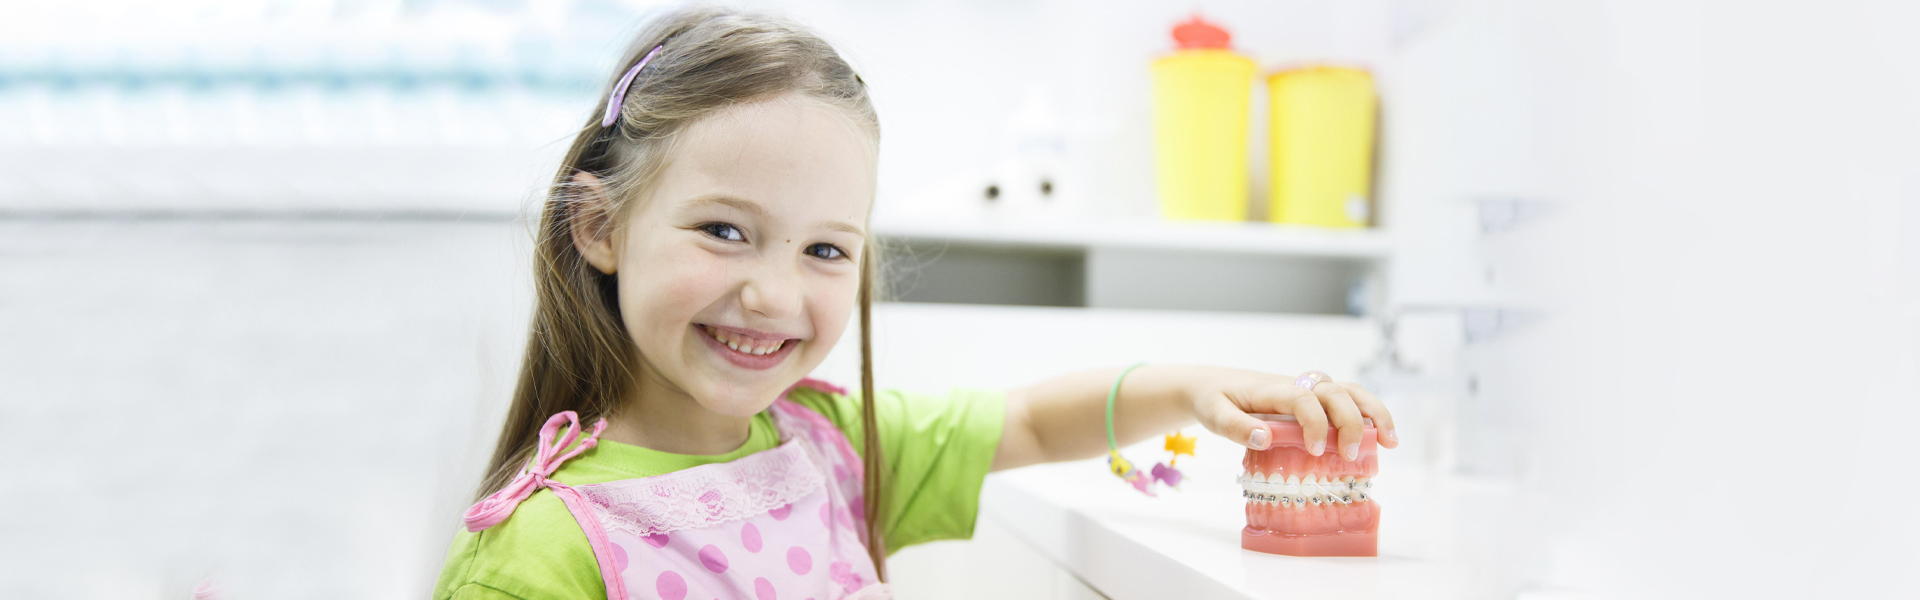 Know How to Handle Dental Emergencies for Your Child